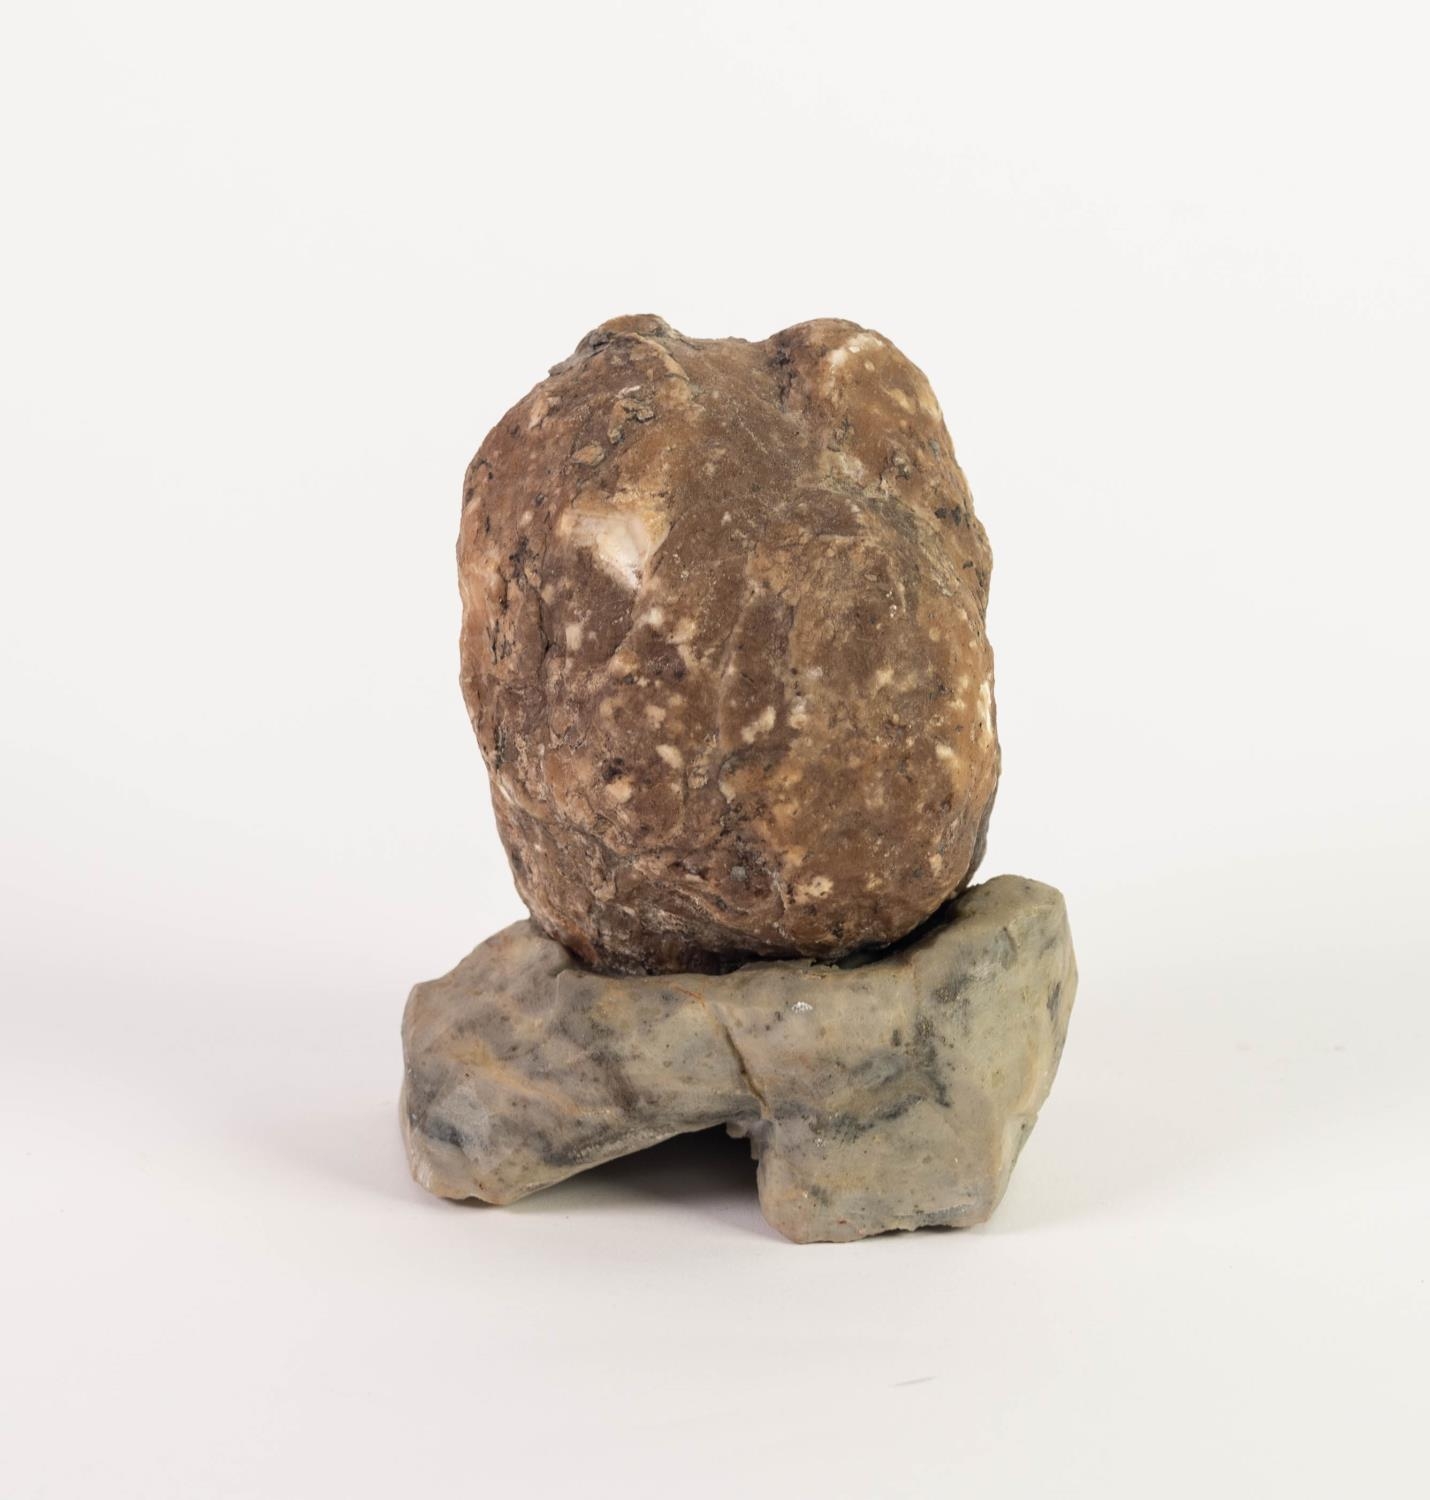 TWENTIETH CENTURY CARVED SOAPSTONE ORNAMENT DEPICTING A SEATED BUDDAH INSIDE A ROCK, with berries - Image 2 of 2